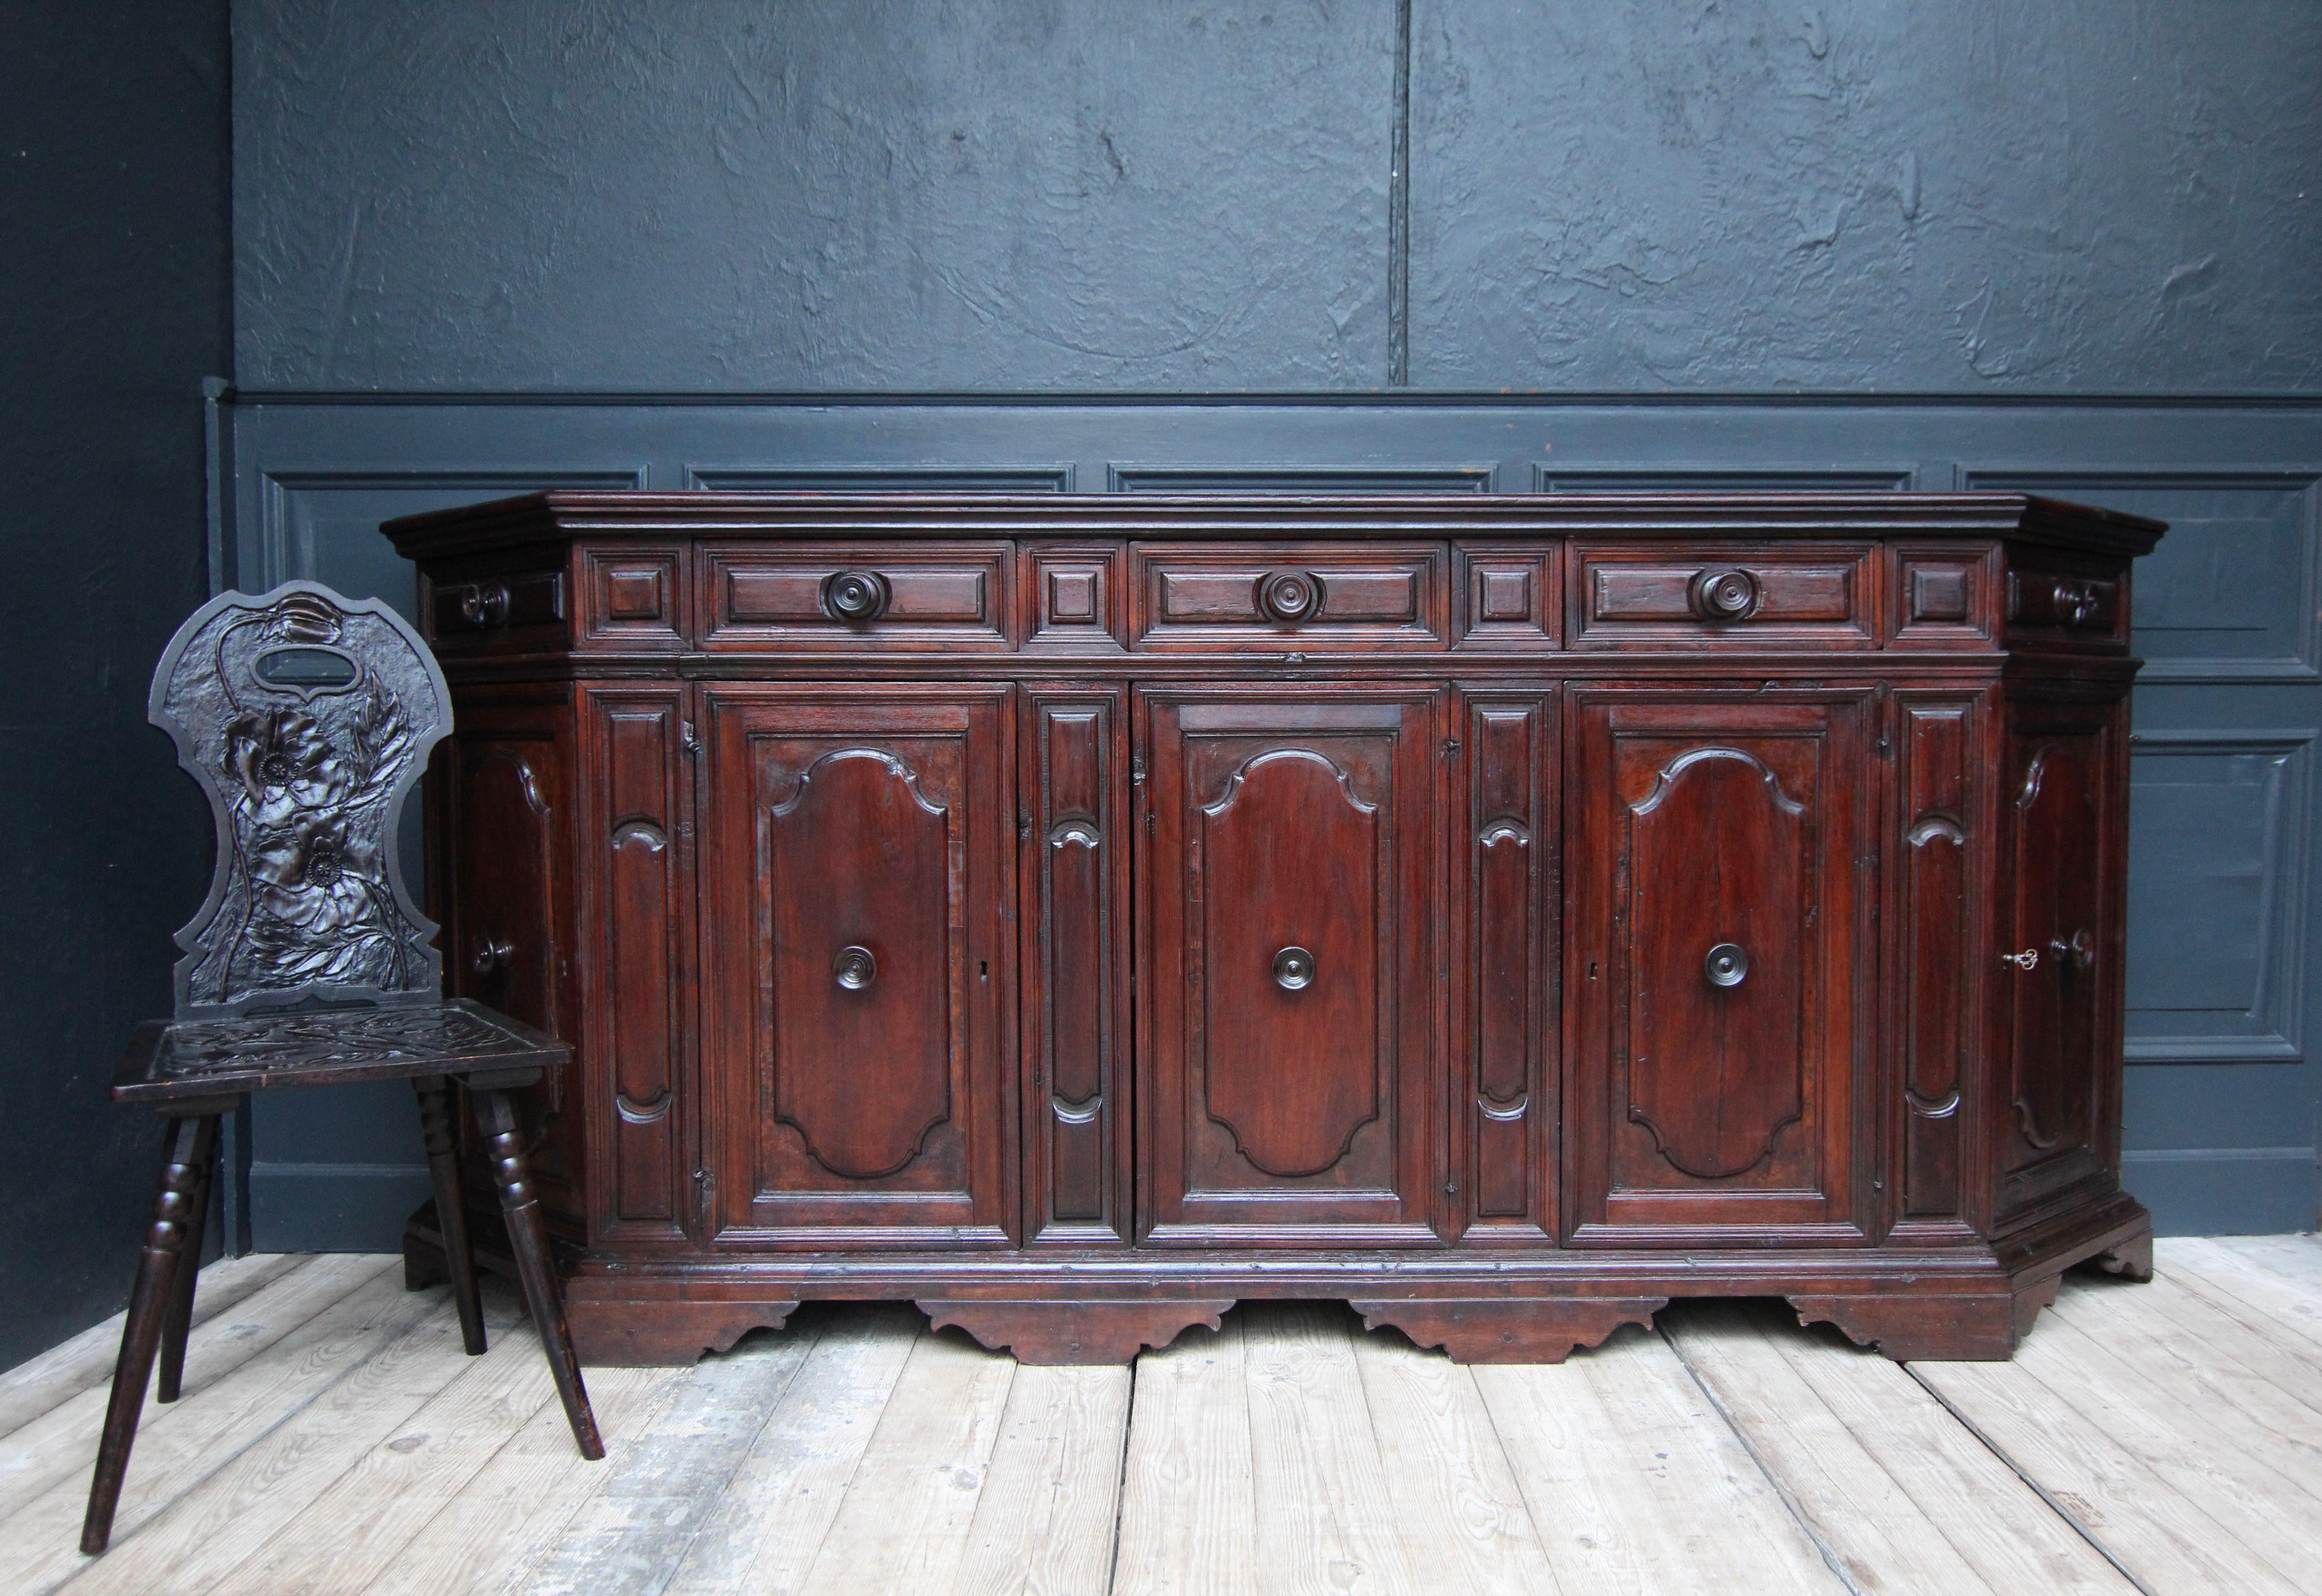 A early 18th century Italian Baroque Scantonata credenza or enfilade in nutwood.

Rectangular nutwood corpus on bracket feet with bevelled sides and a profiled top. A total of 5 doors and 5 drawers, each with a round turned knob.

Dimensions: